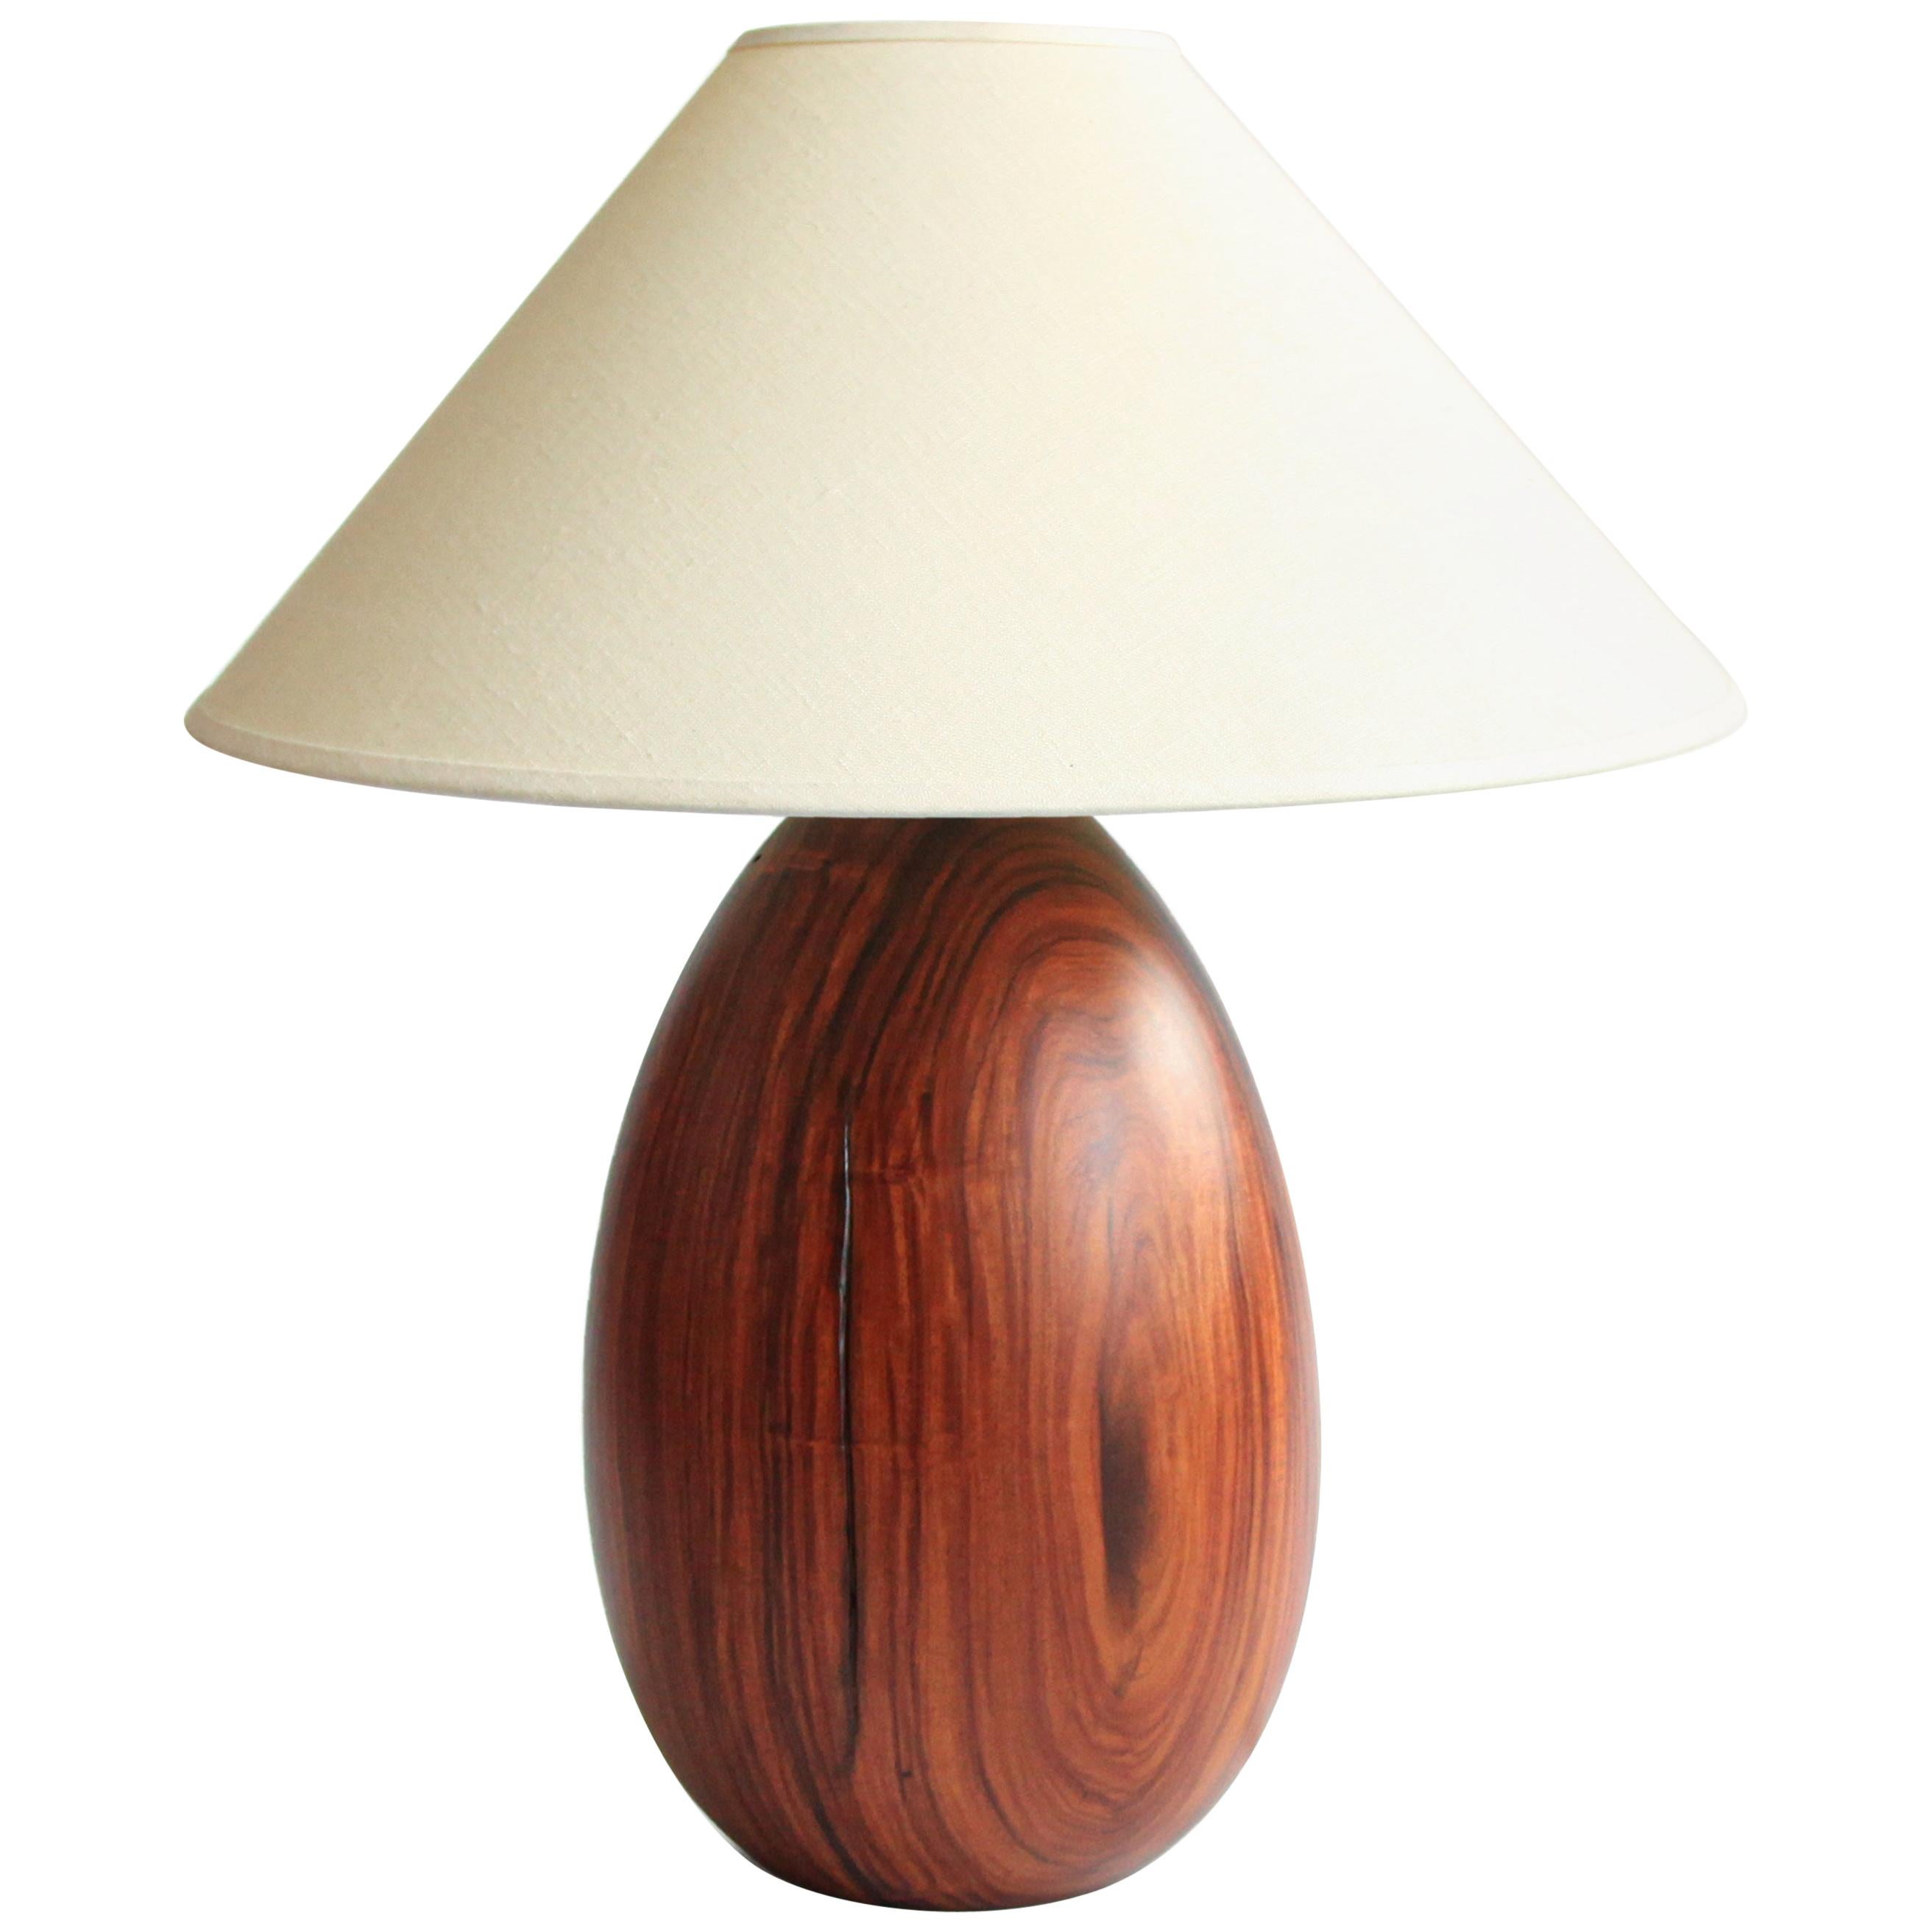 Bolivian Rosewood Lamp + White Linen Shade, Medium Large, Árbol Collection, 23 For Sale